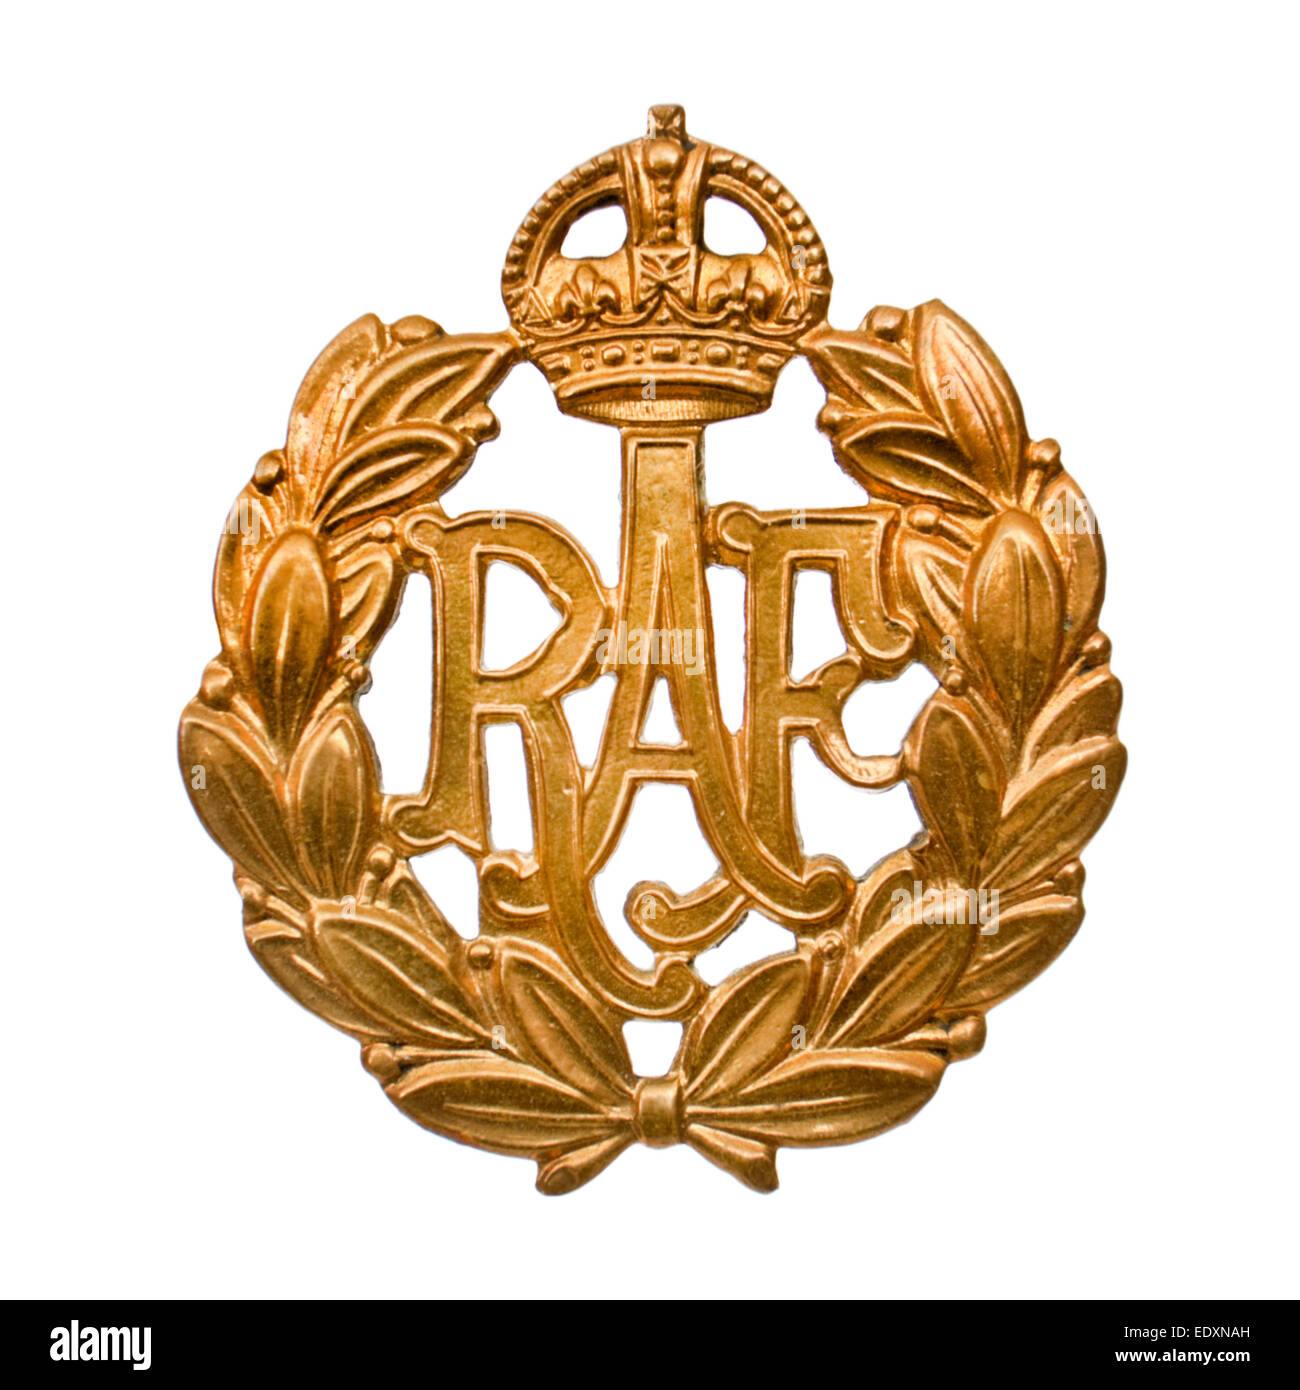 Vintage WW2 British Royal Air Force (RAF) cap badge (OR - Other Ranks type). Stock Photo